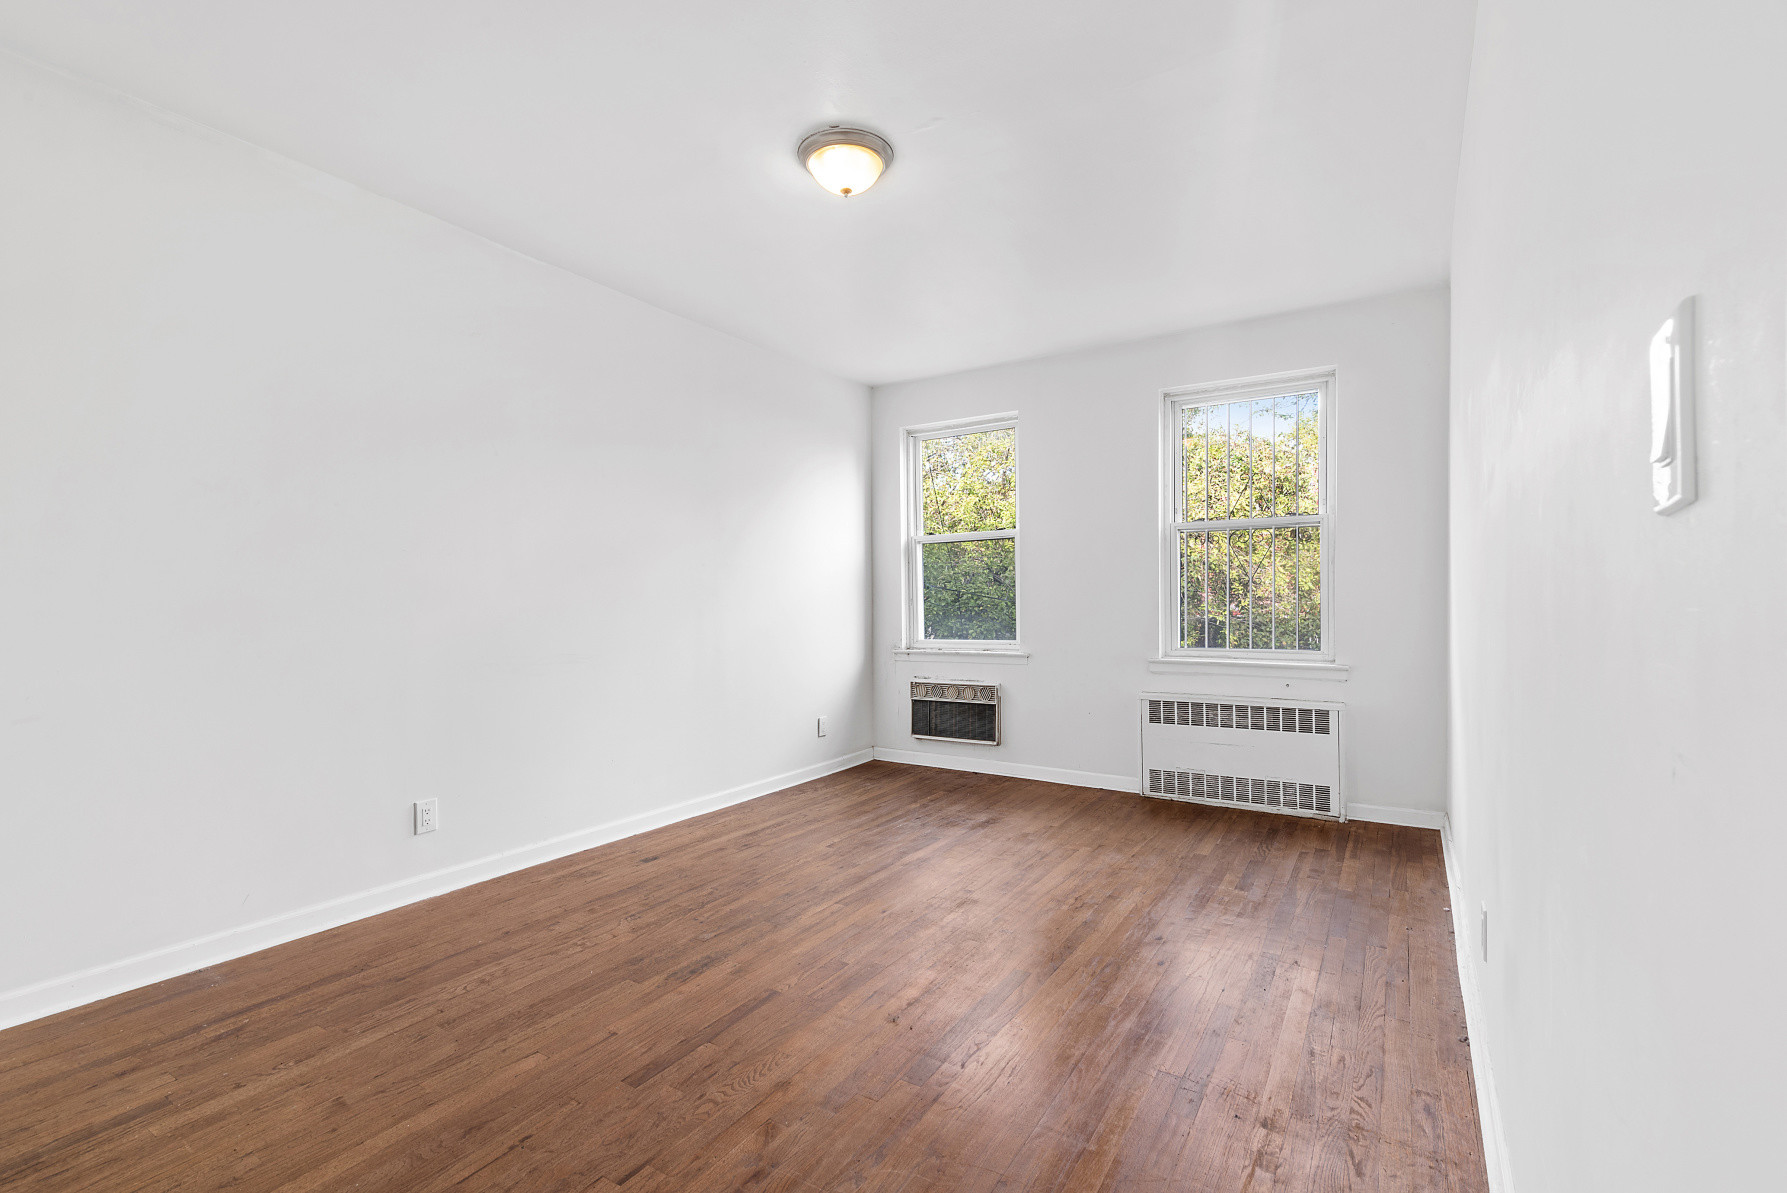 17 Stylish Hardwood Flooring Queens Ny 2024 free download hardwood flooring queens ny of laquana mcneil real estate agent in new york city compass within 986b78a75b725095ac693dbfe6abc63c49abdc3e